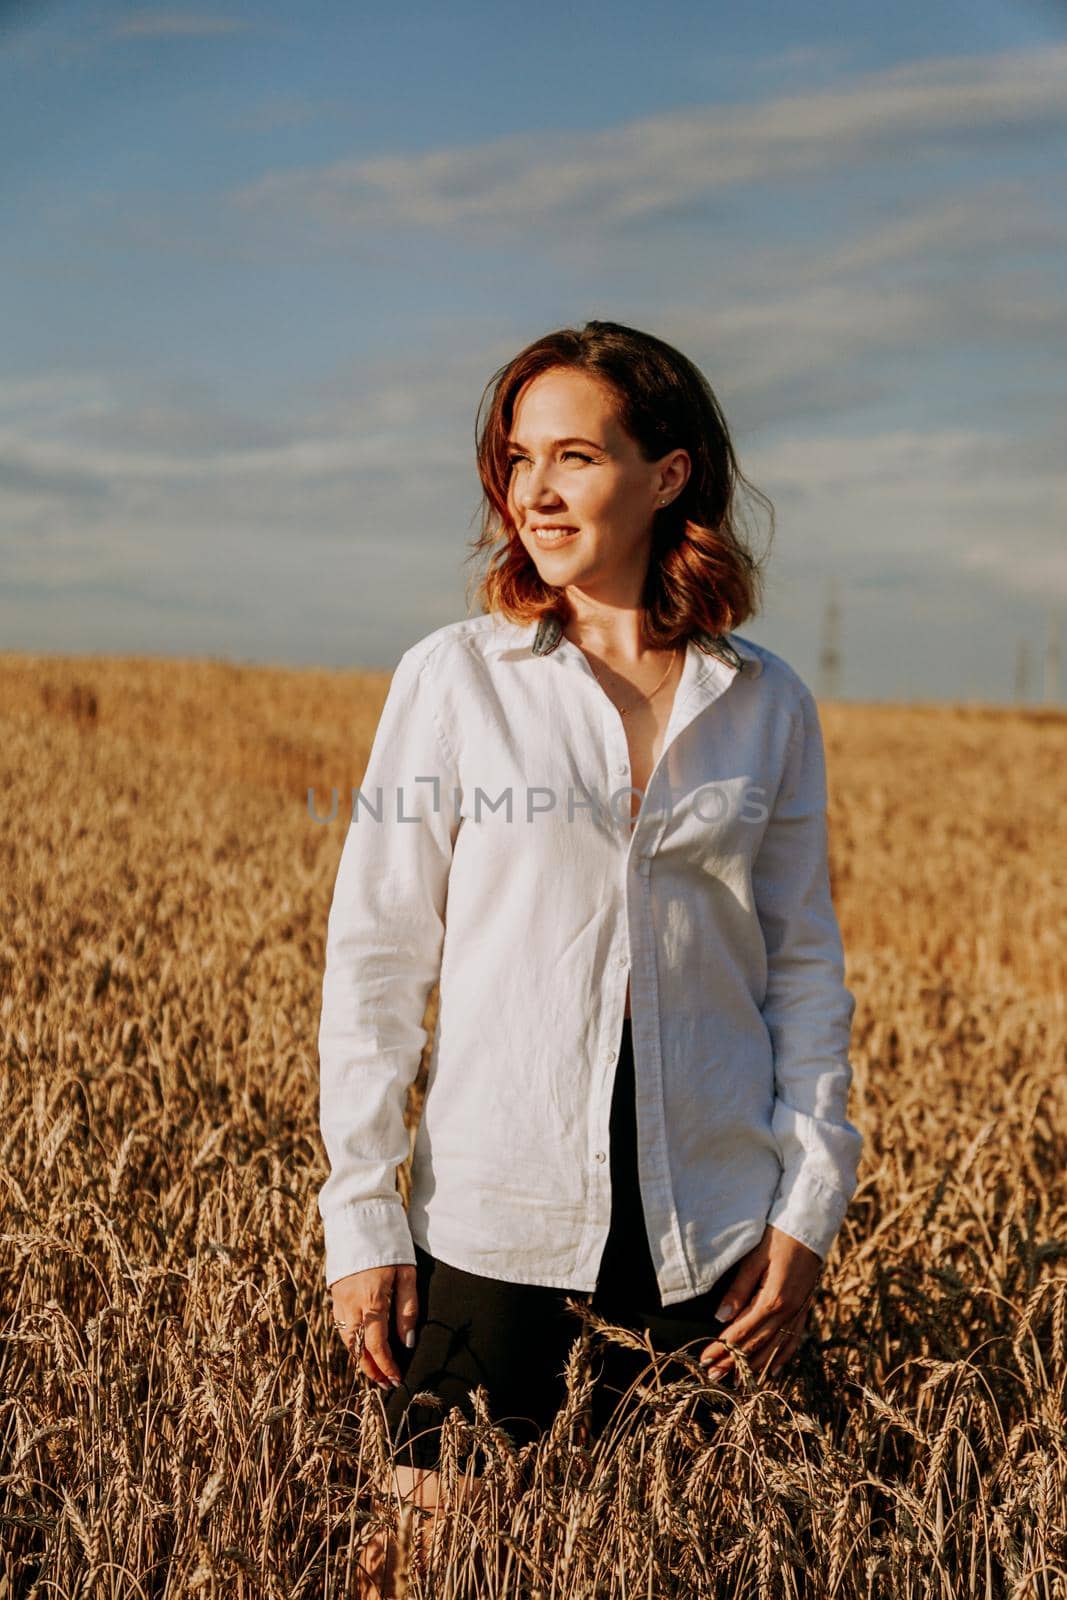 Happy young woman in a white shirt in a wheat field. Sunny day. Girl smiling, happiness concept. Vertical photo